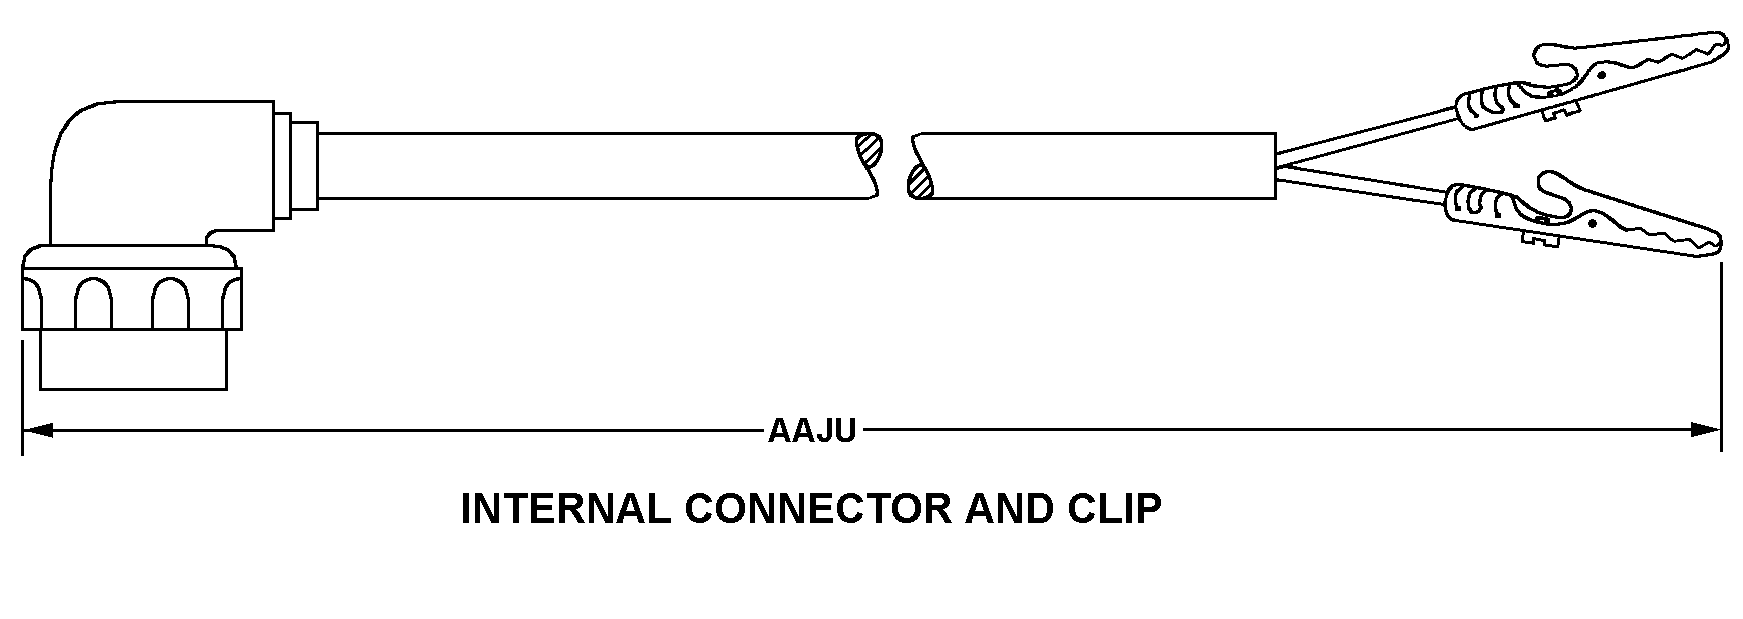 INTERNAL CONNECTOR AND CLIP style nsn 5995-00-889-1305